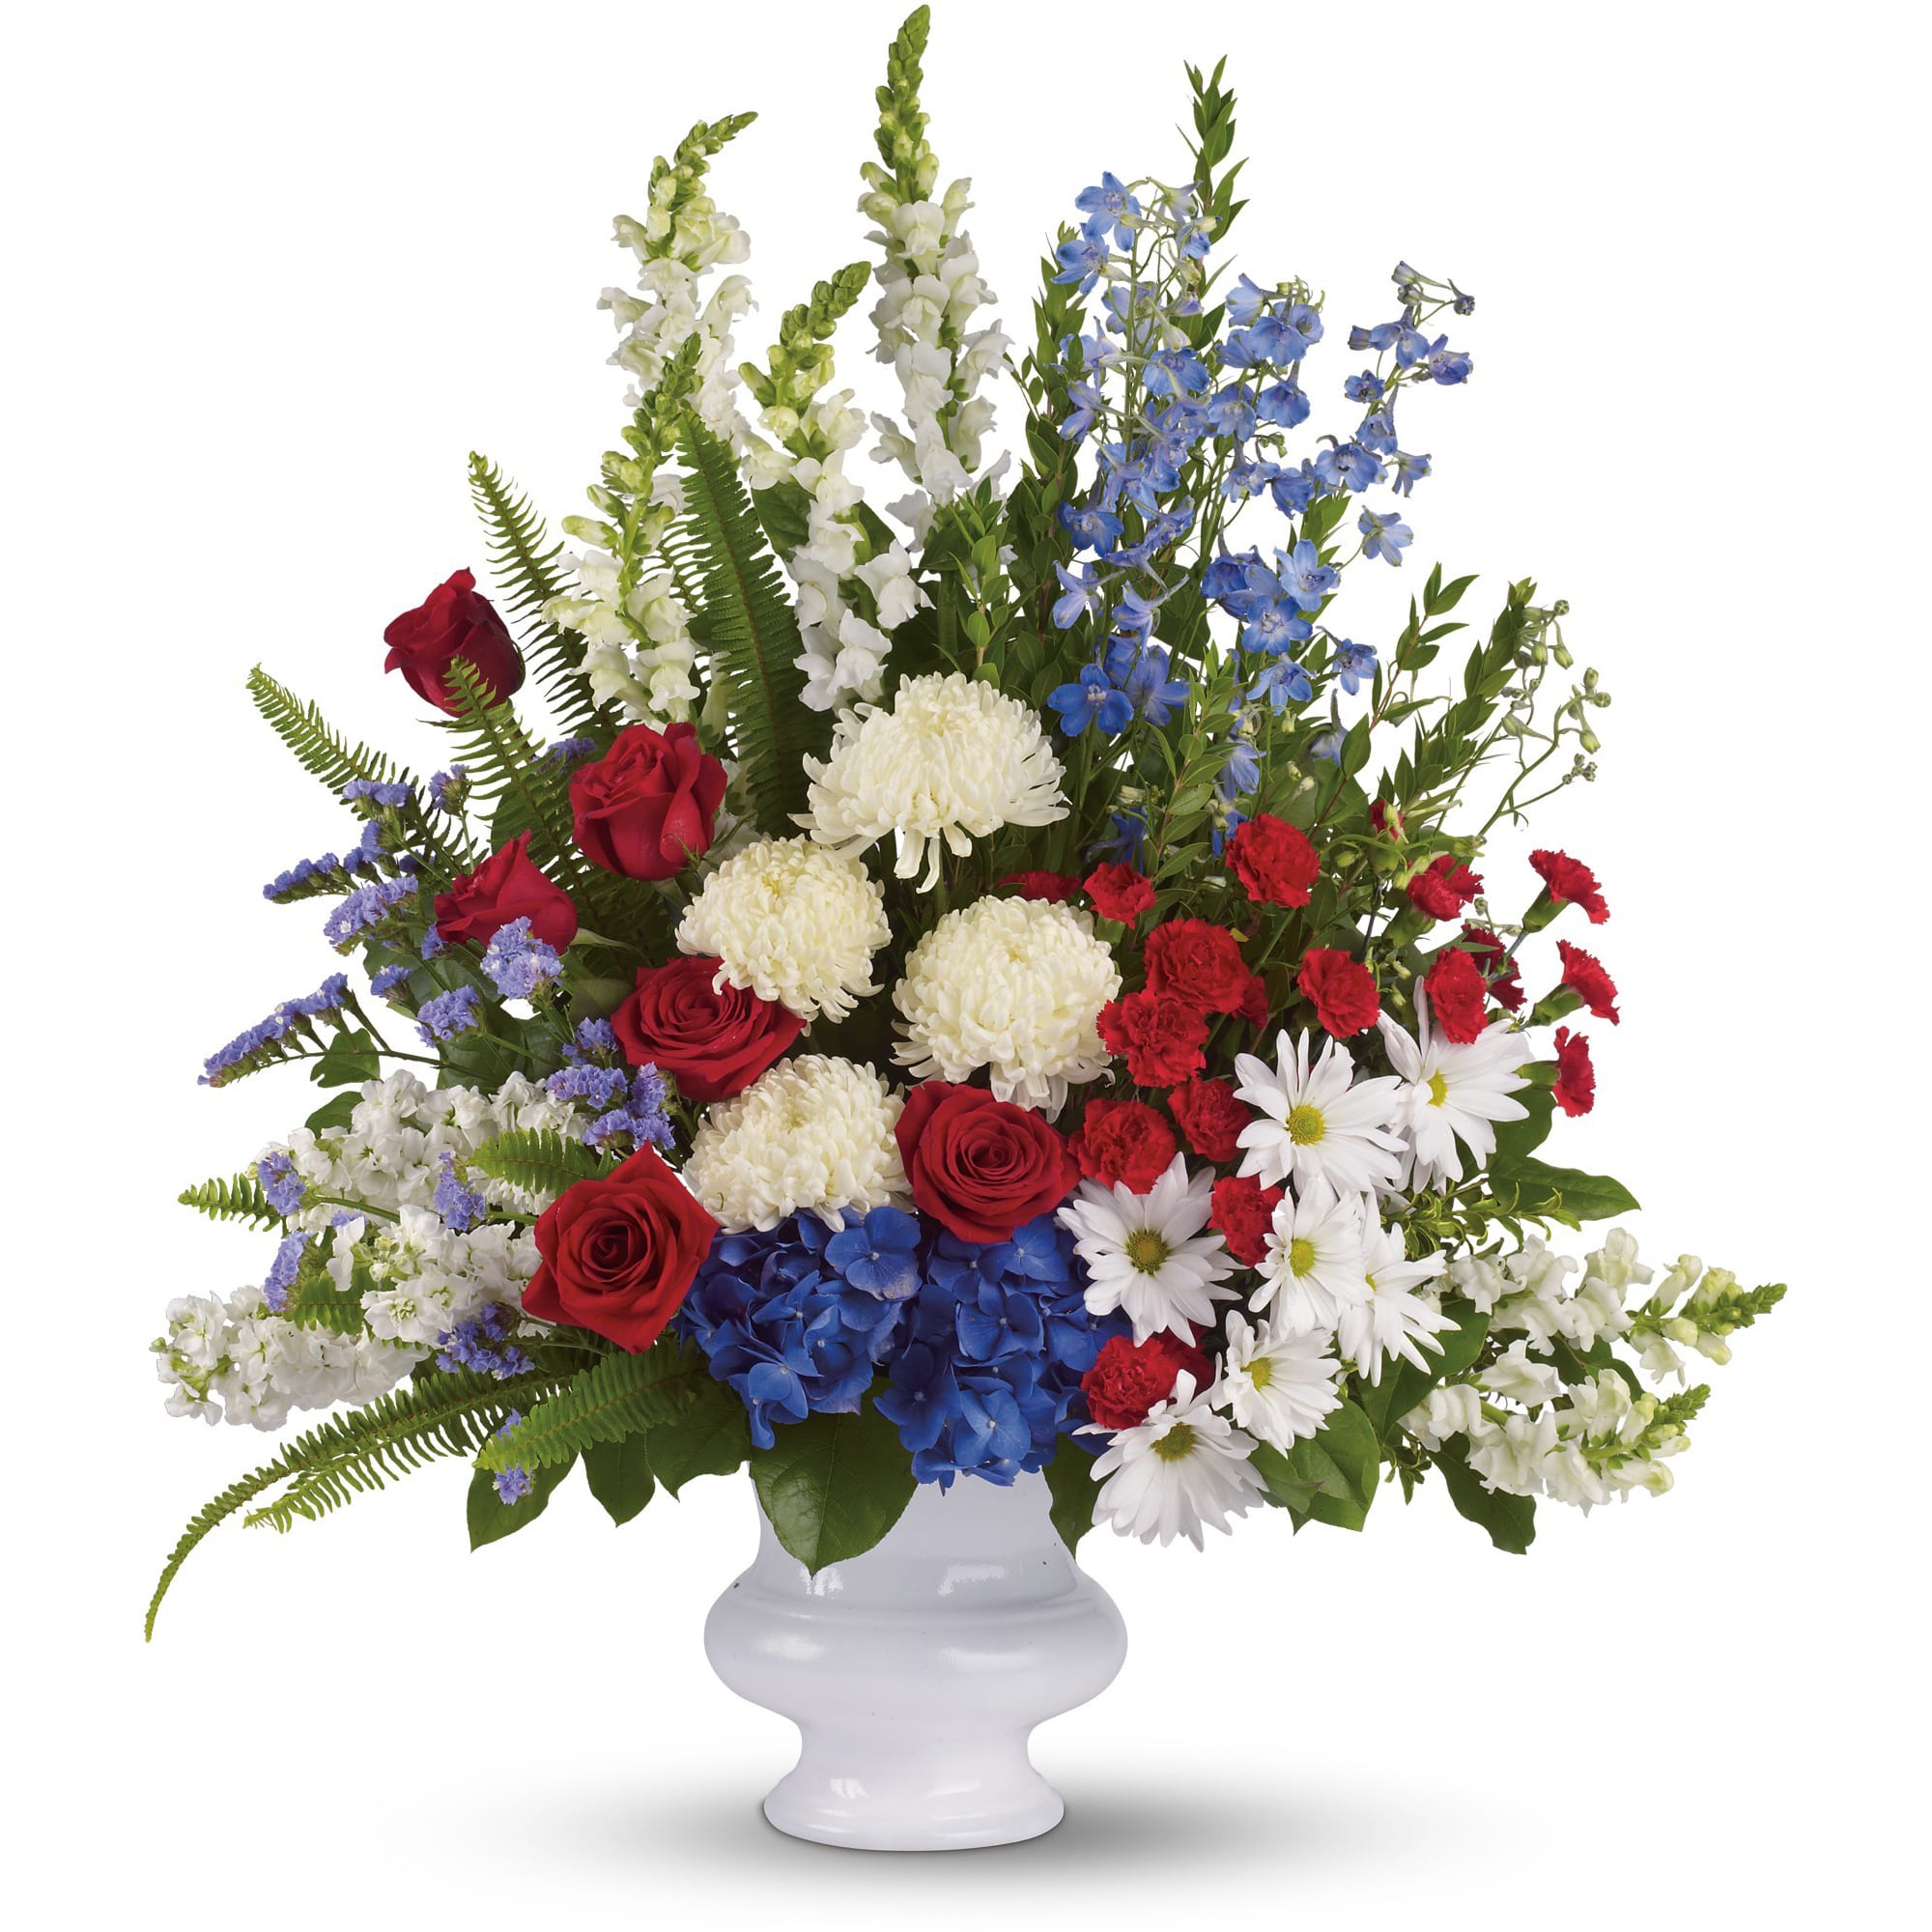 With Distinction by Teleflora - A dazzling display of patriotic red, white and blue flowers sends a silent yet poignant statement about hope, freedom and the strength to endure. This proud bouquet is a testament to life that is sure to be appreciated. 